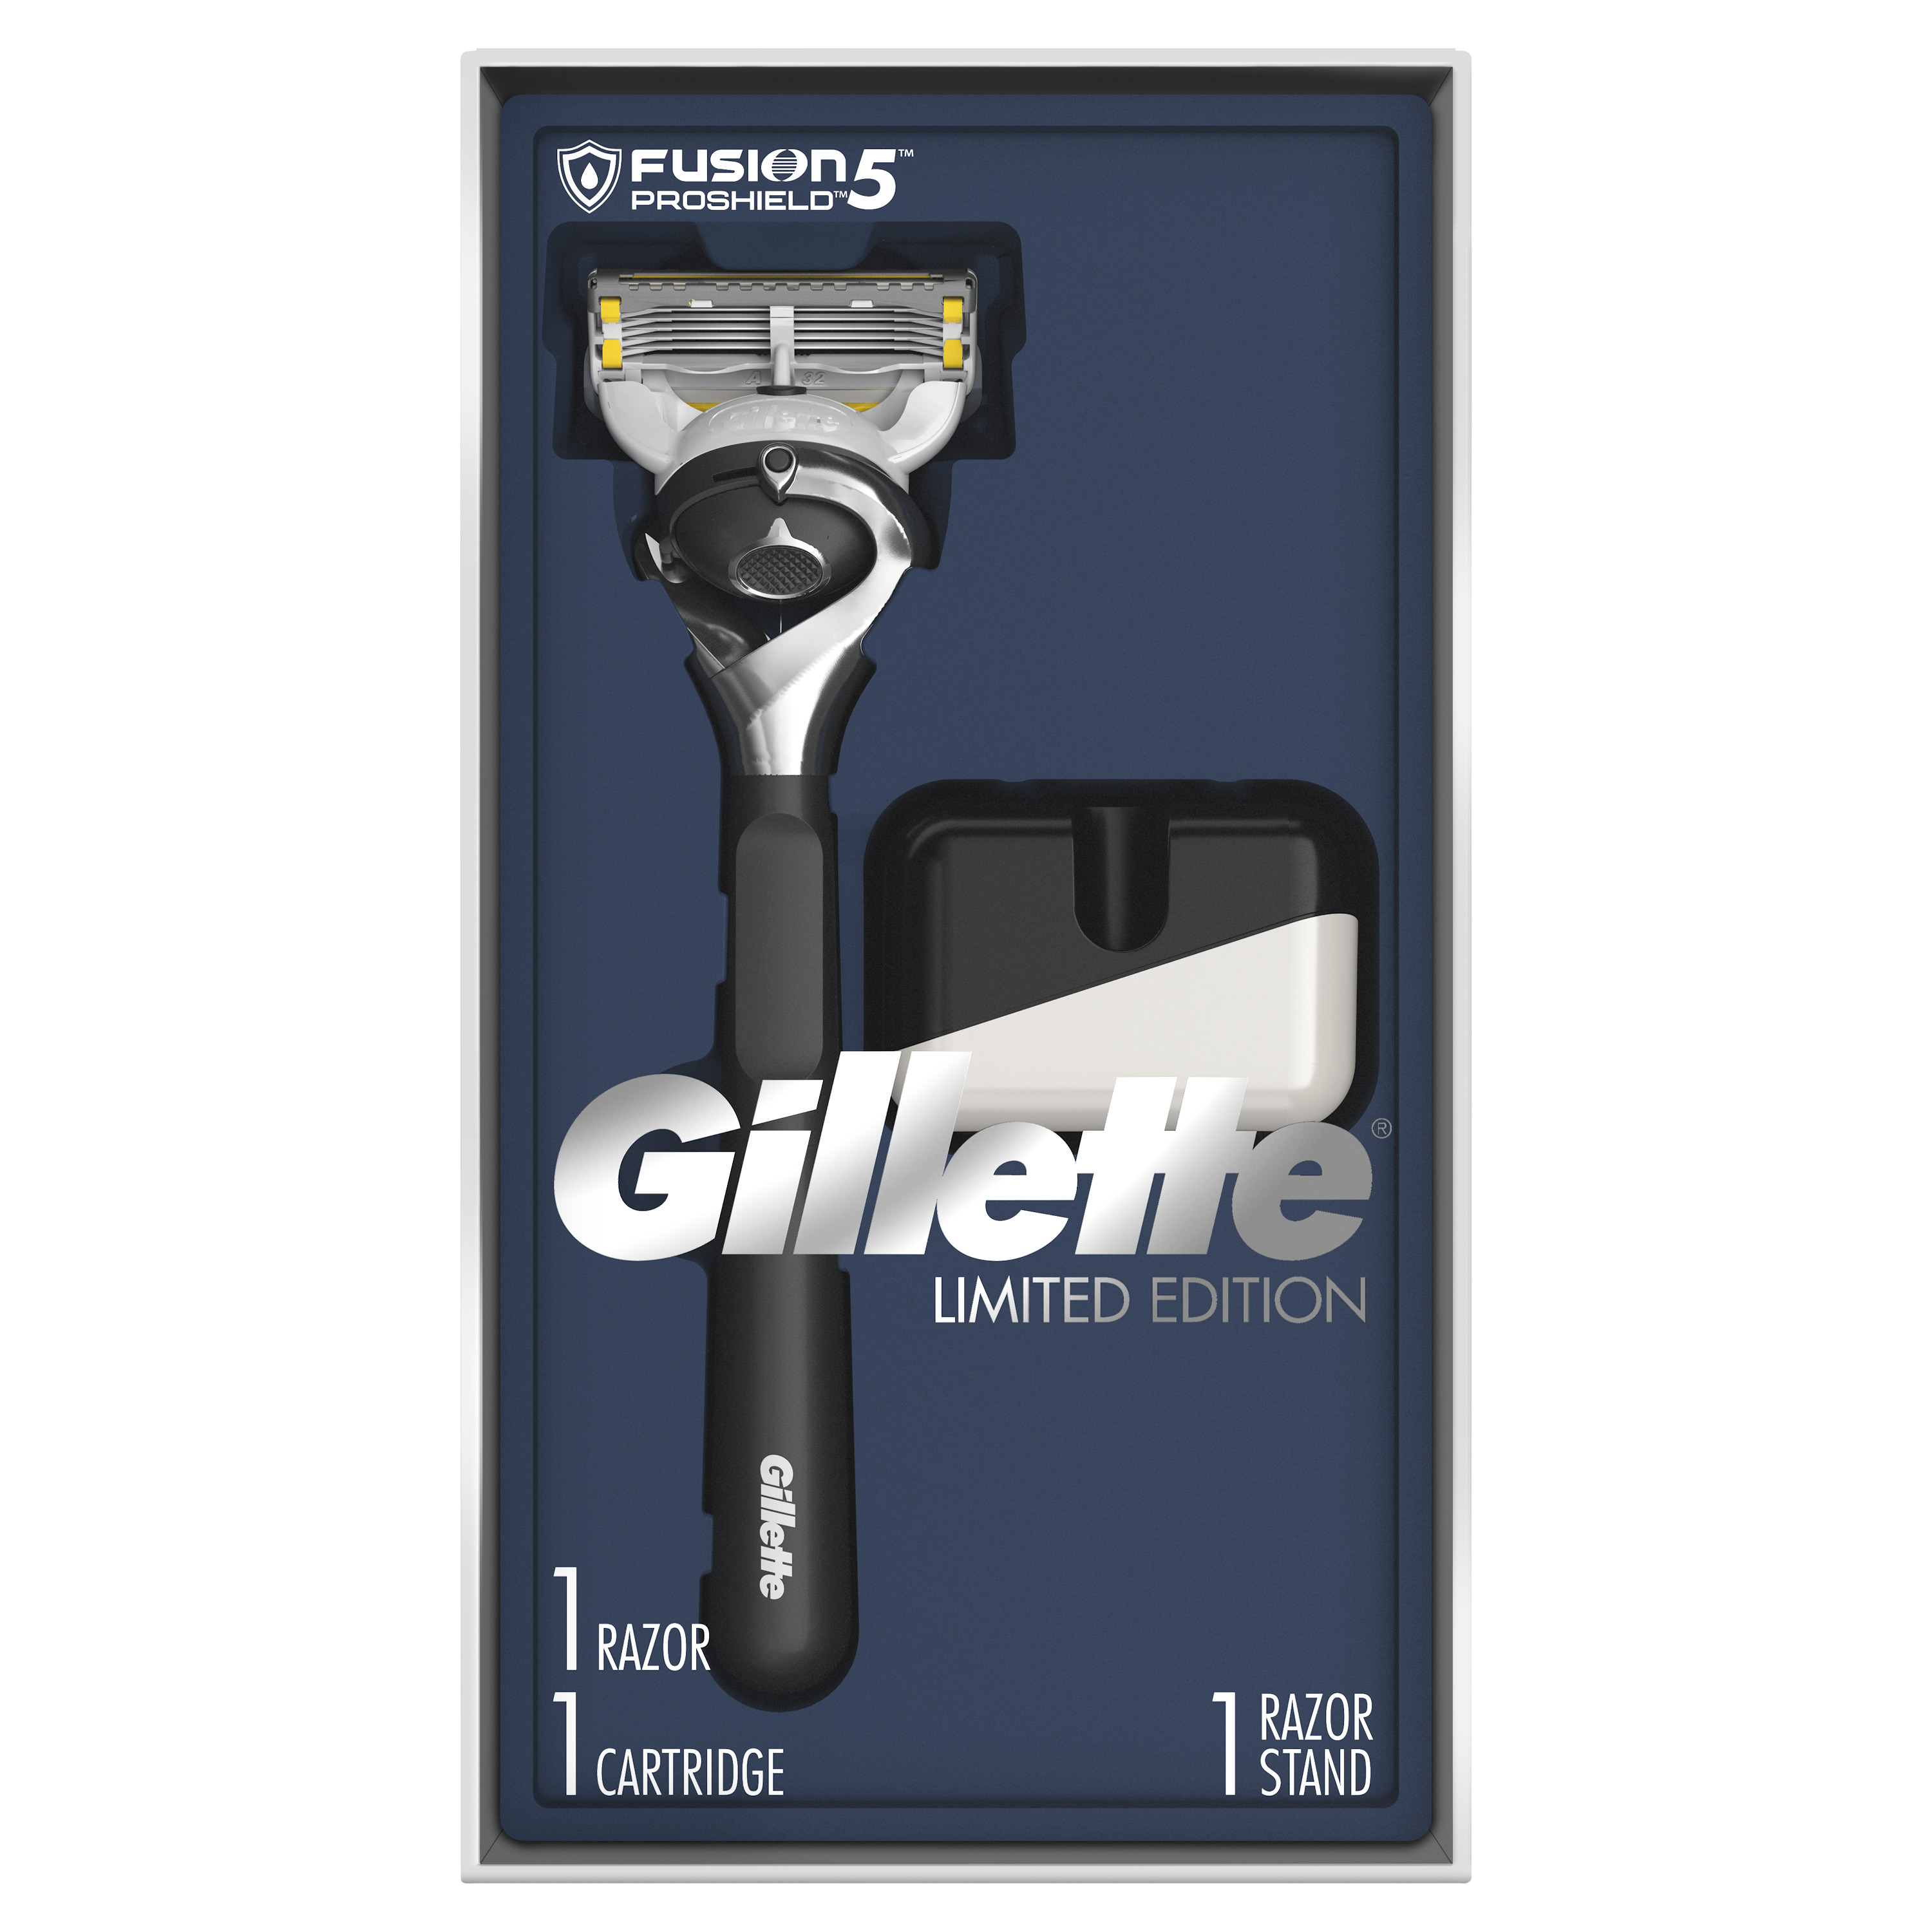 Gillette Limited Edition Fusion5 ProShield Razor Gift Pack - image 1 of 6